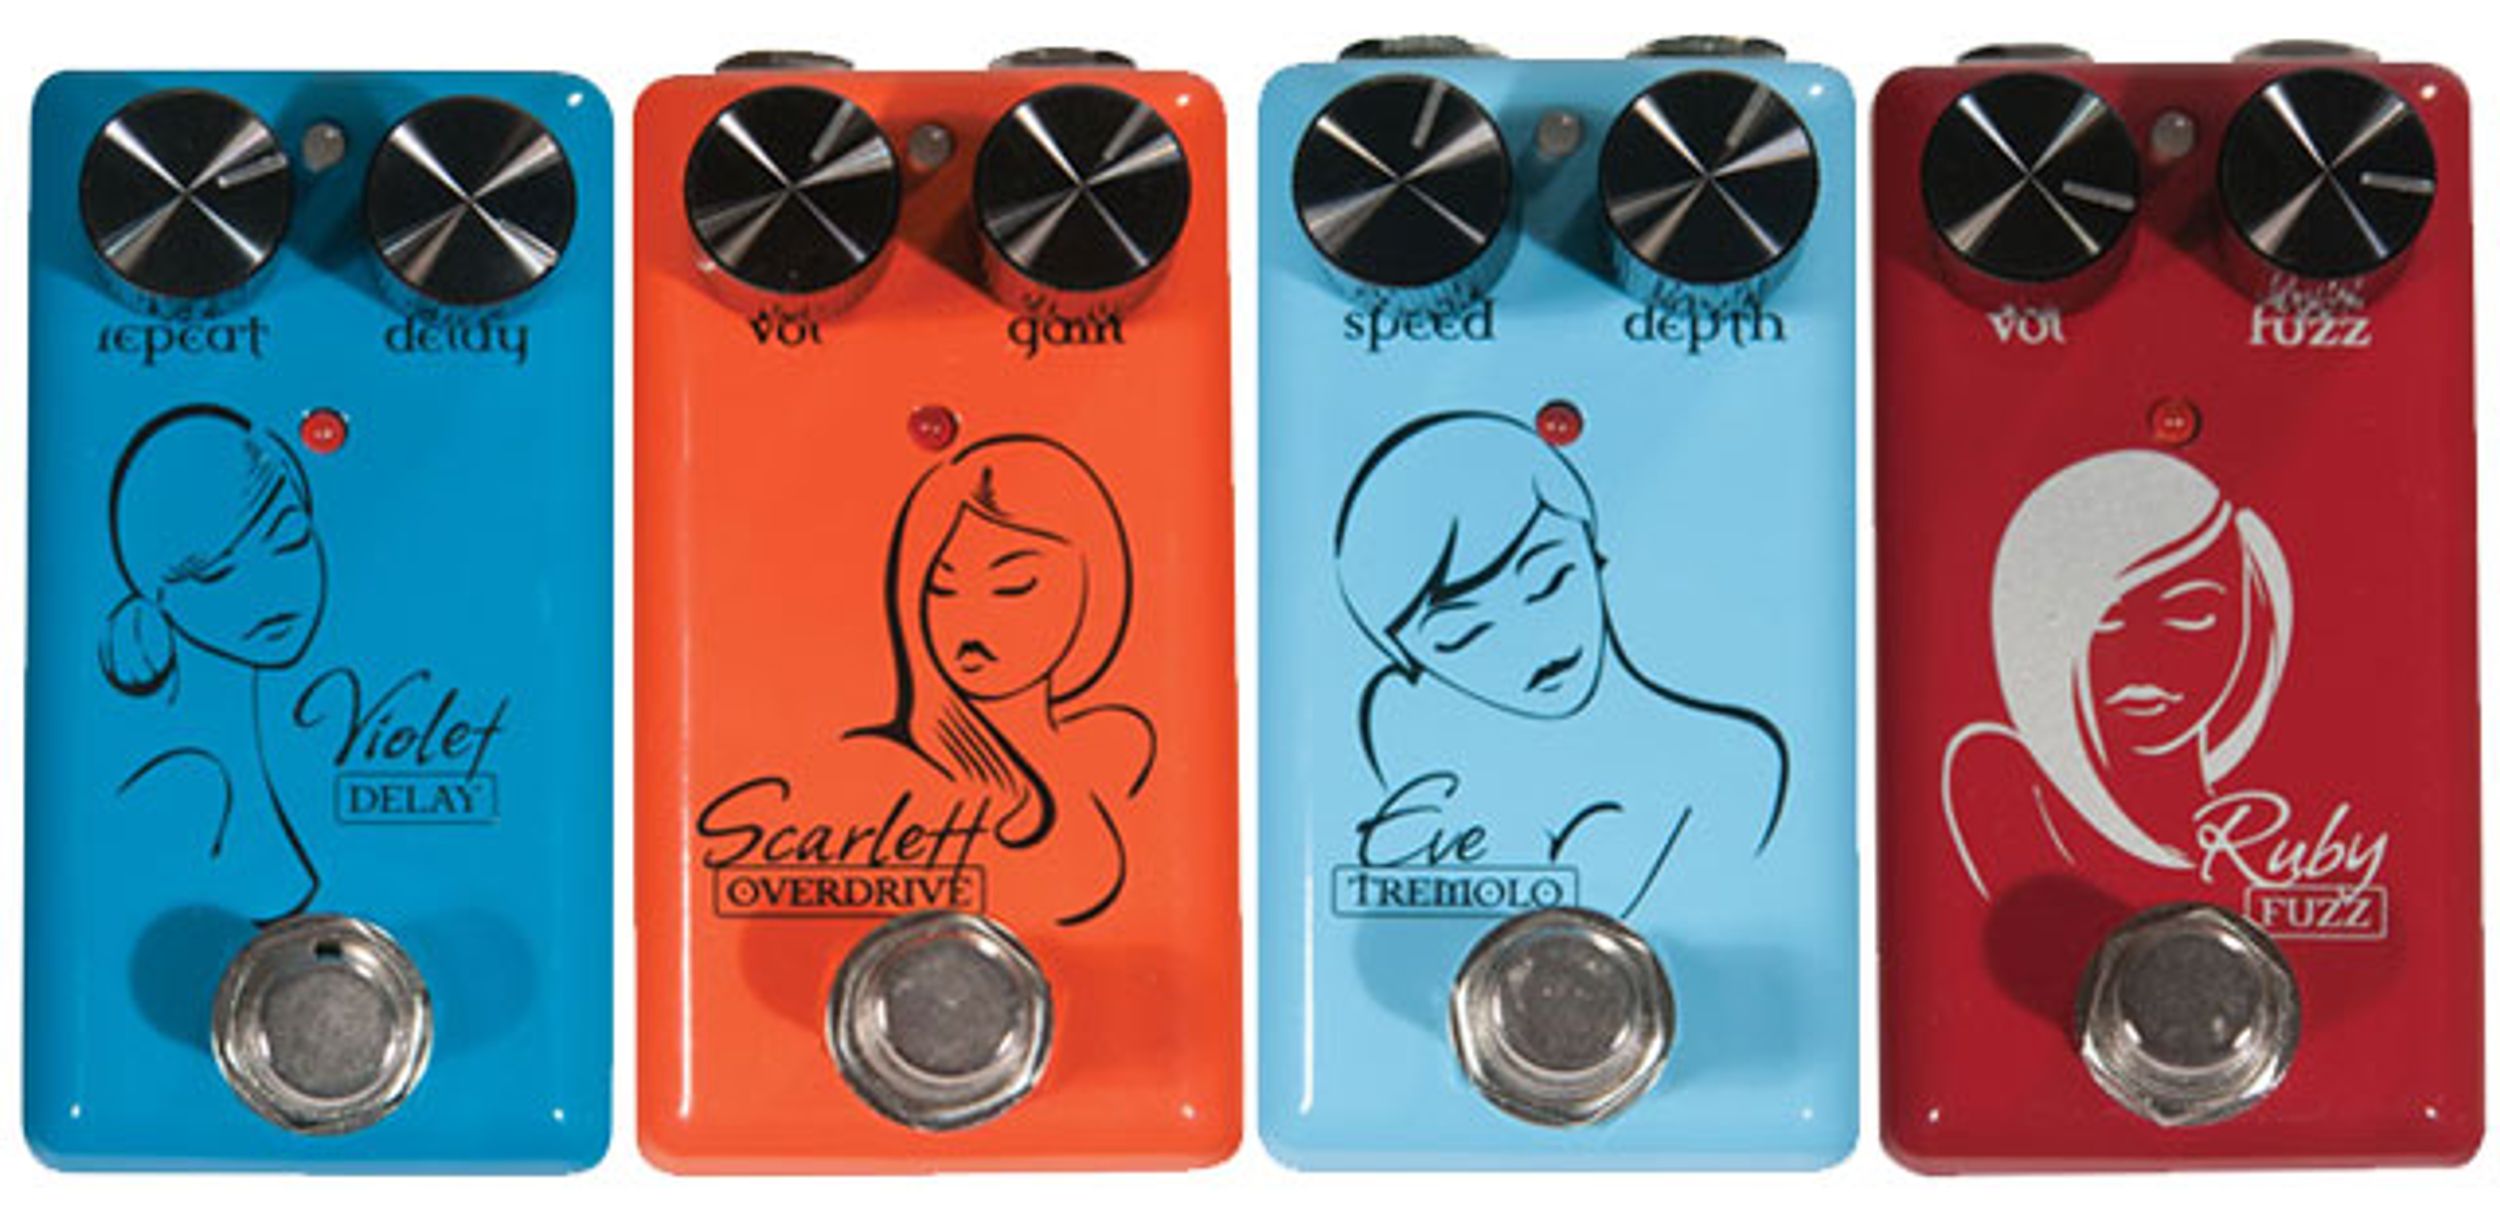 Red Witch Ruby Fuzz, Violet Delay, Scarlett Overdrive, and Eve Tremolo Reviews